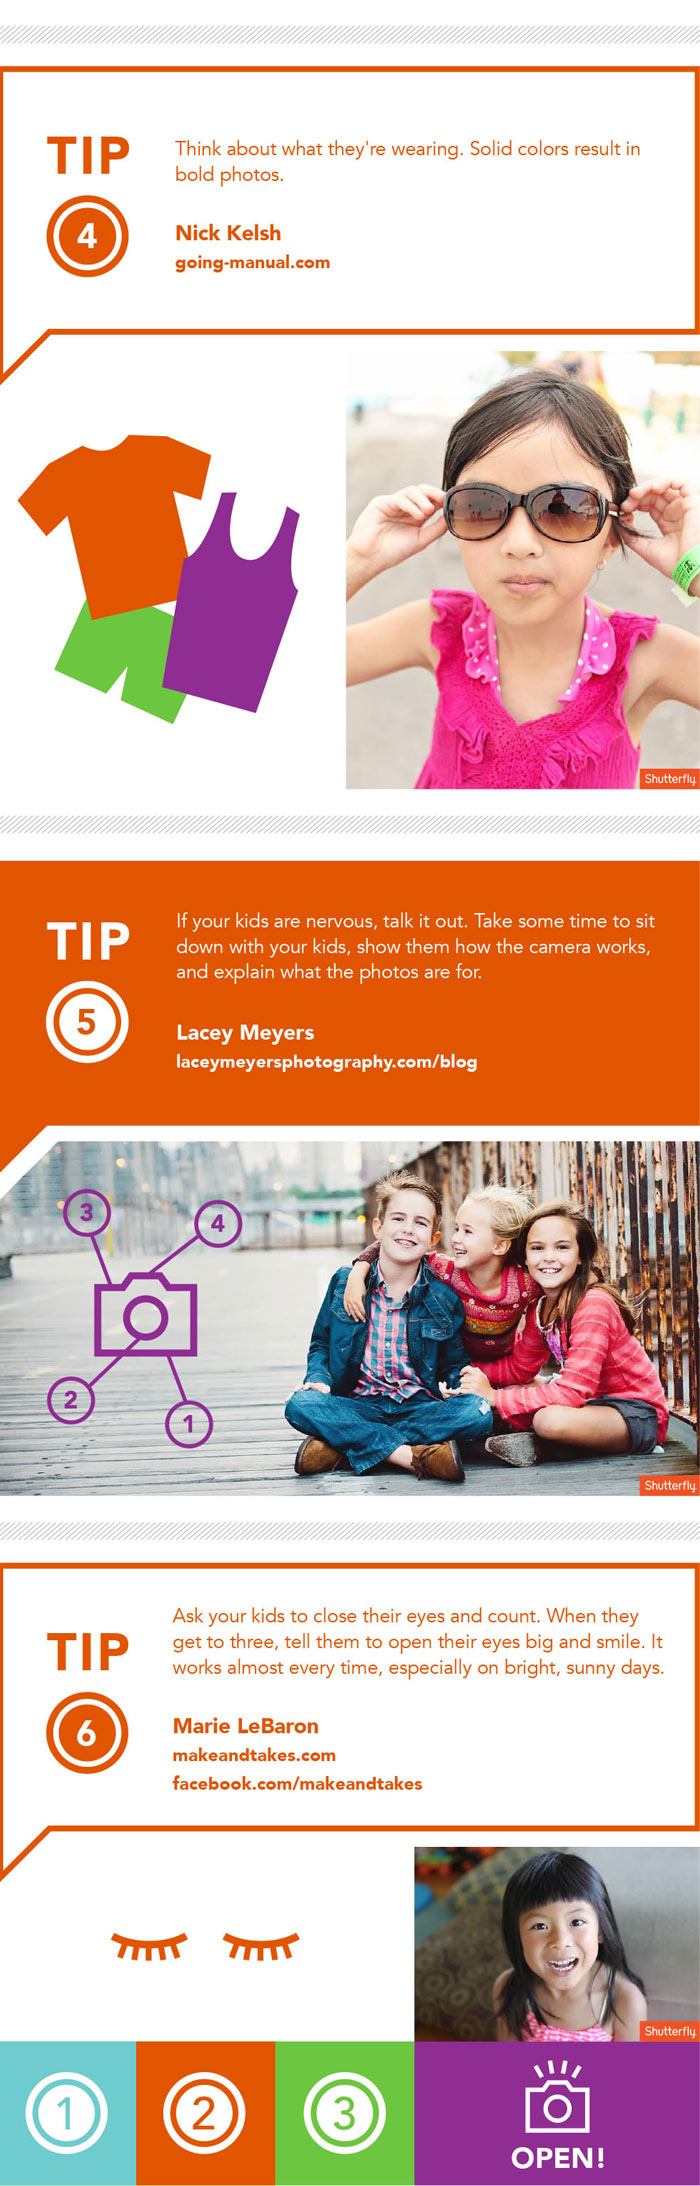 Kids Photography Tips Infographic by Shutterfly